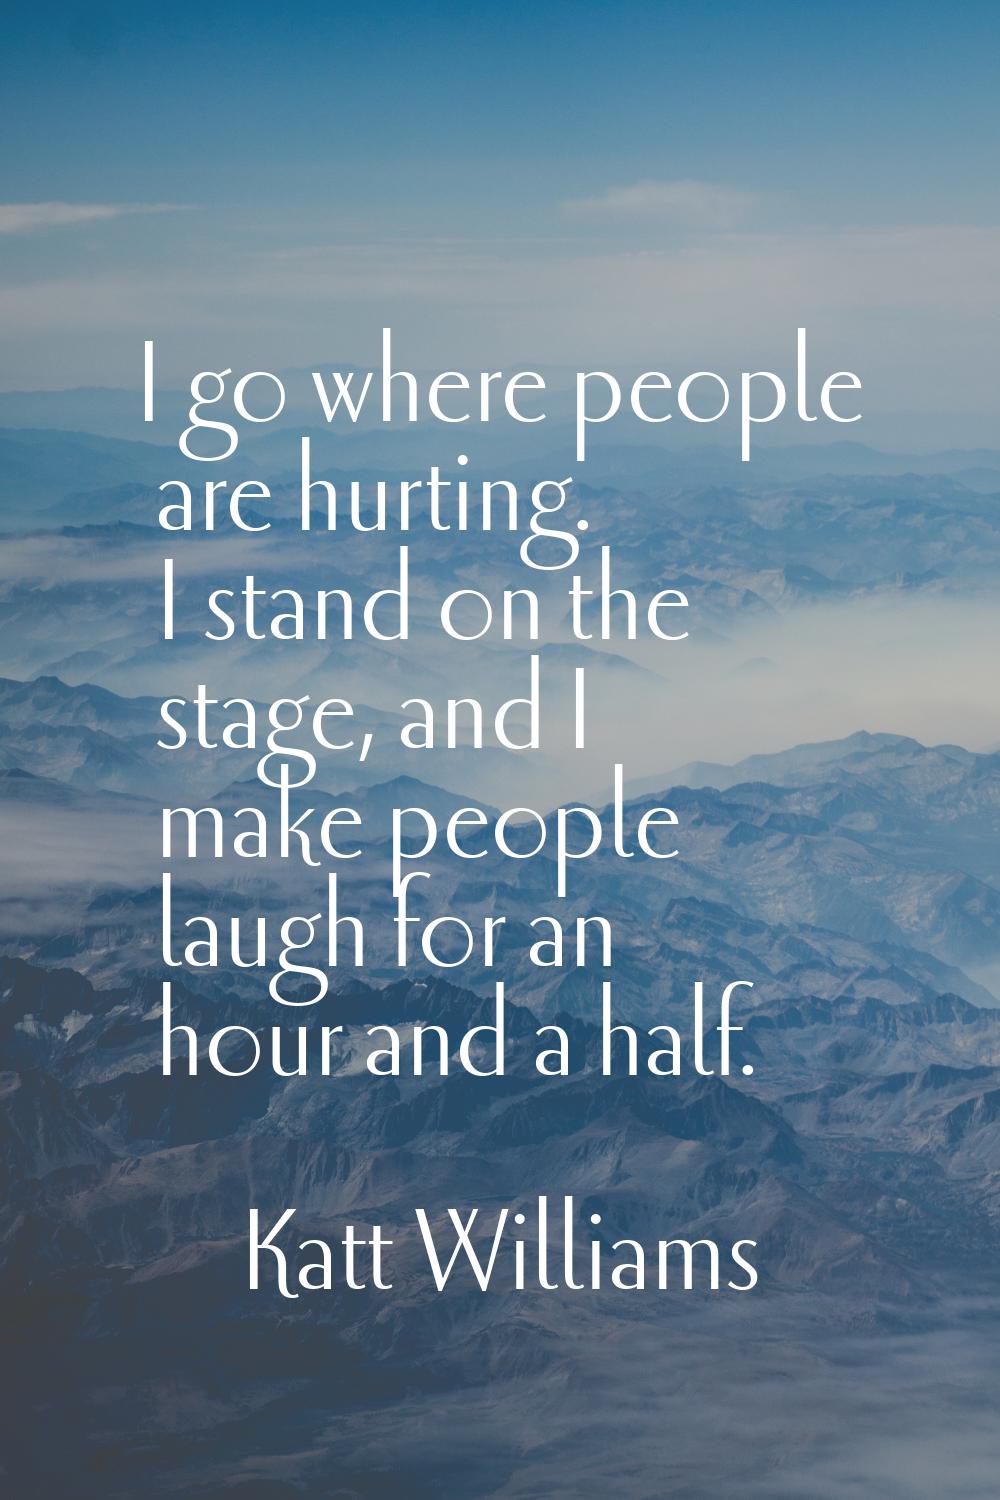 I go where people are hurting. I stand on the stage, and I make people laugh for an hour and a half